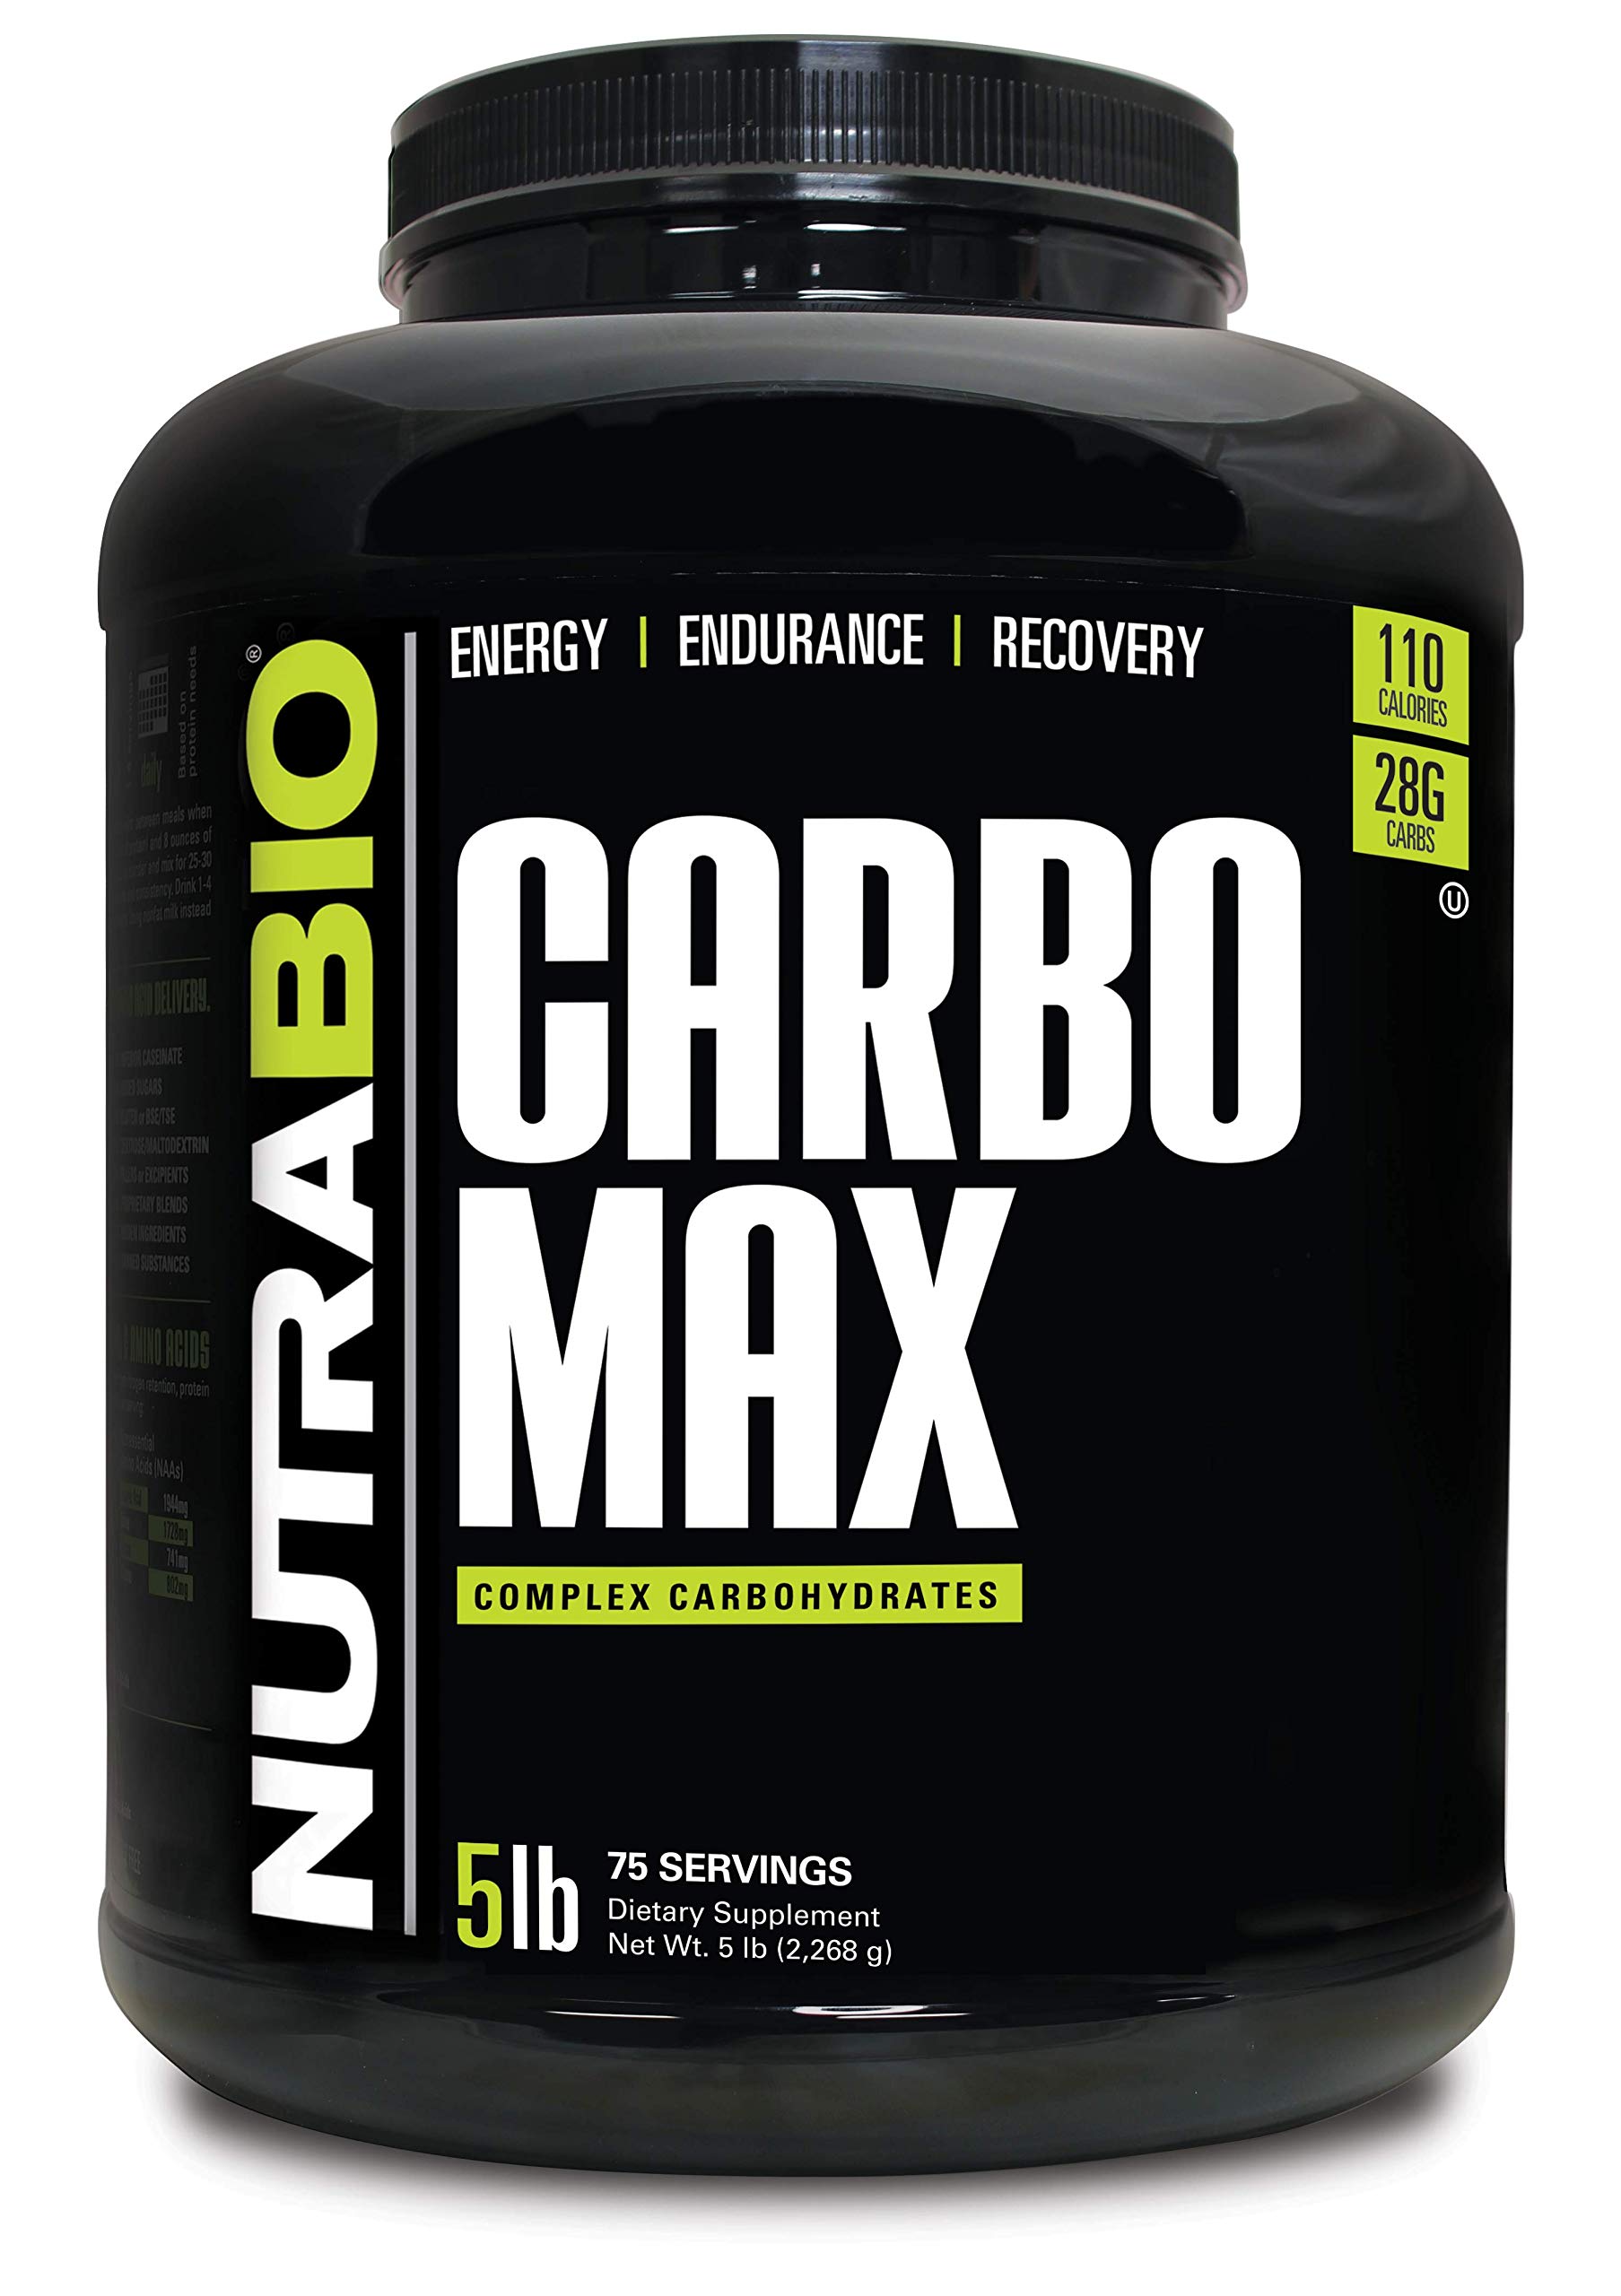 NutraBio CarboMax Maltodextrin - Complex Carbohydrate Powder for Sustained Energy - Calorie Rich for Muscle and Weight Gain - Unflavored - 5 Pounds, 75 Servings